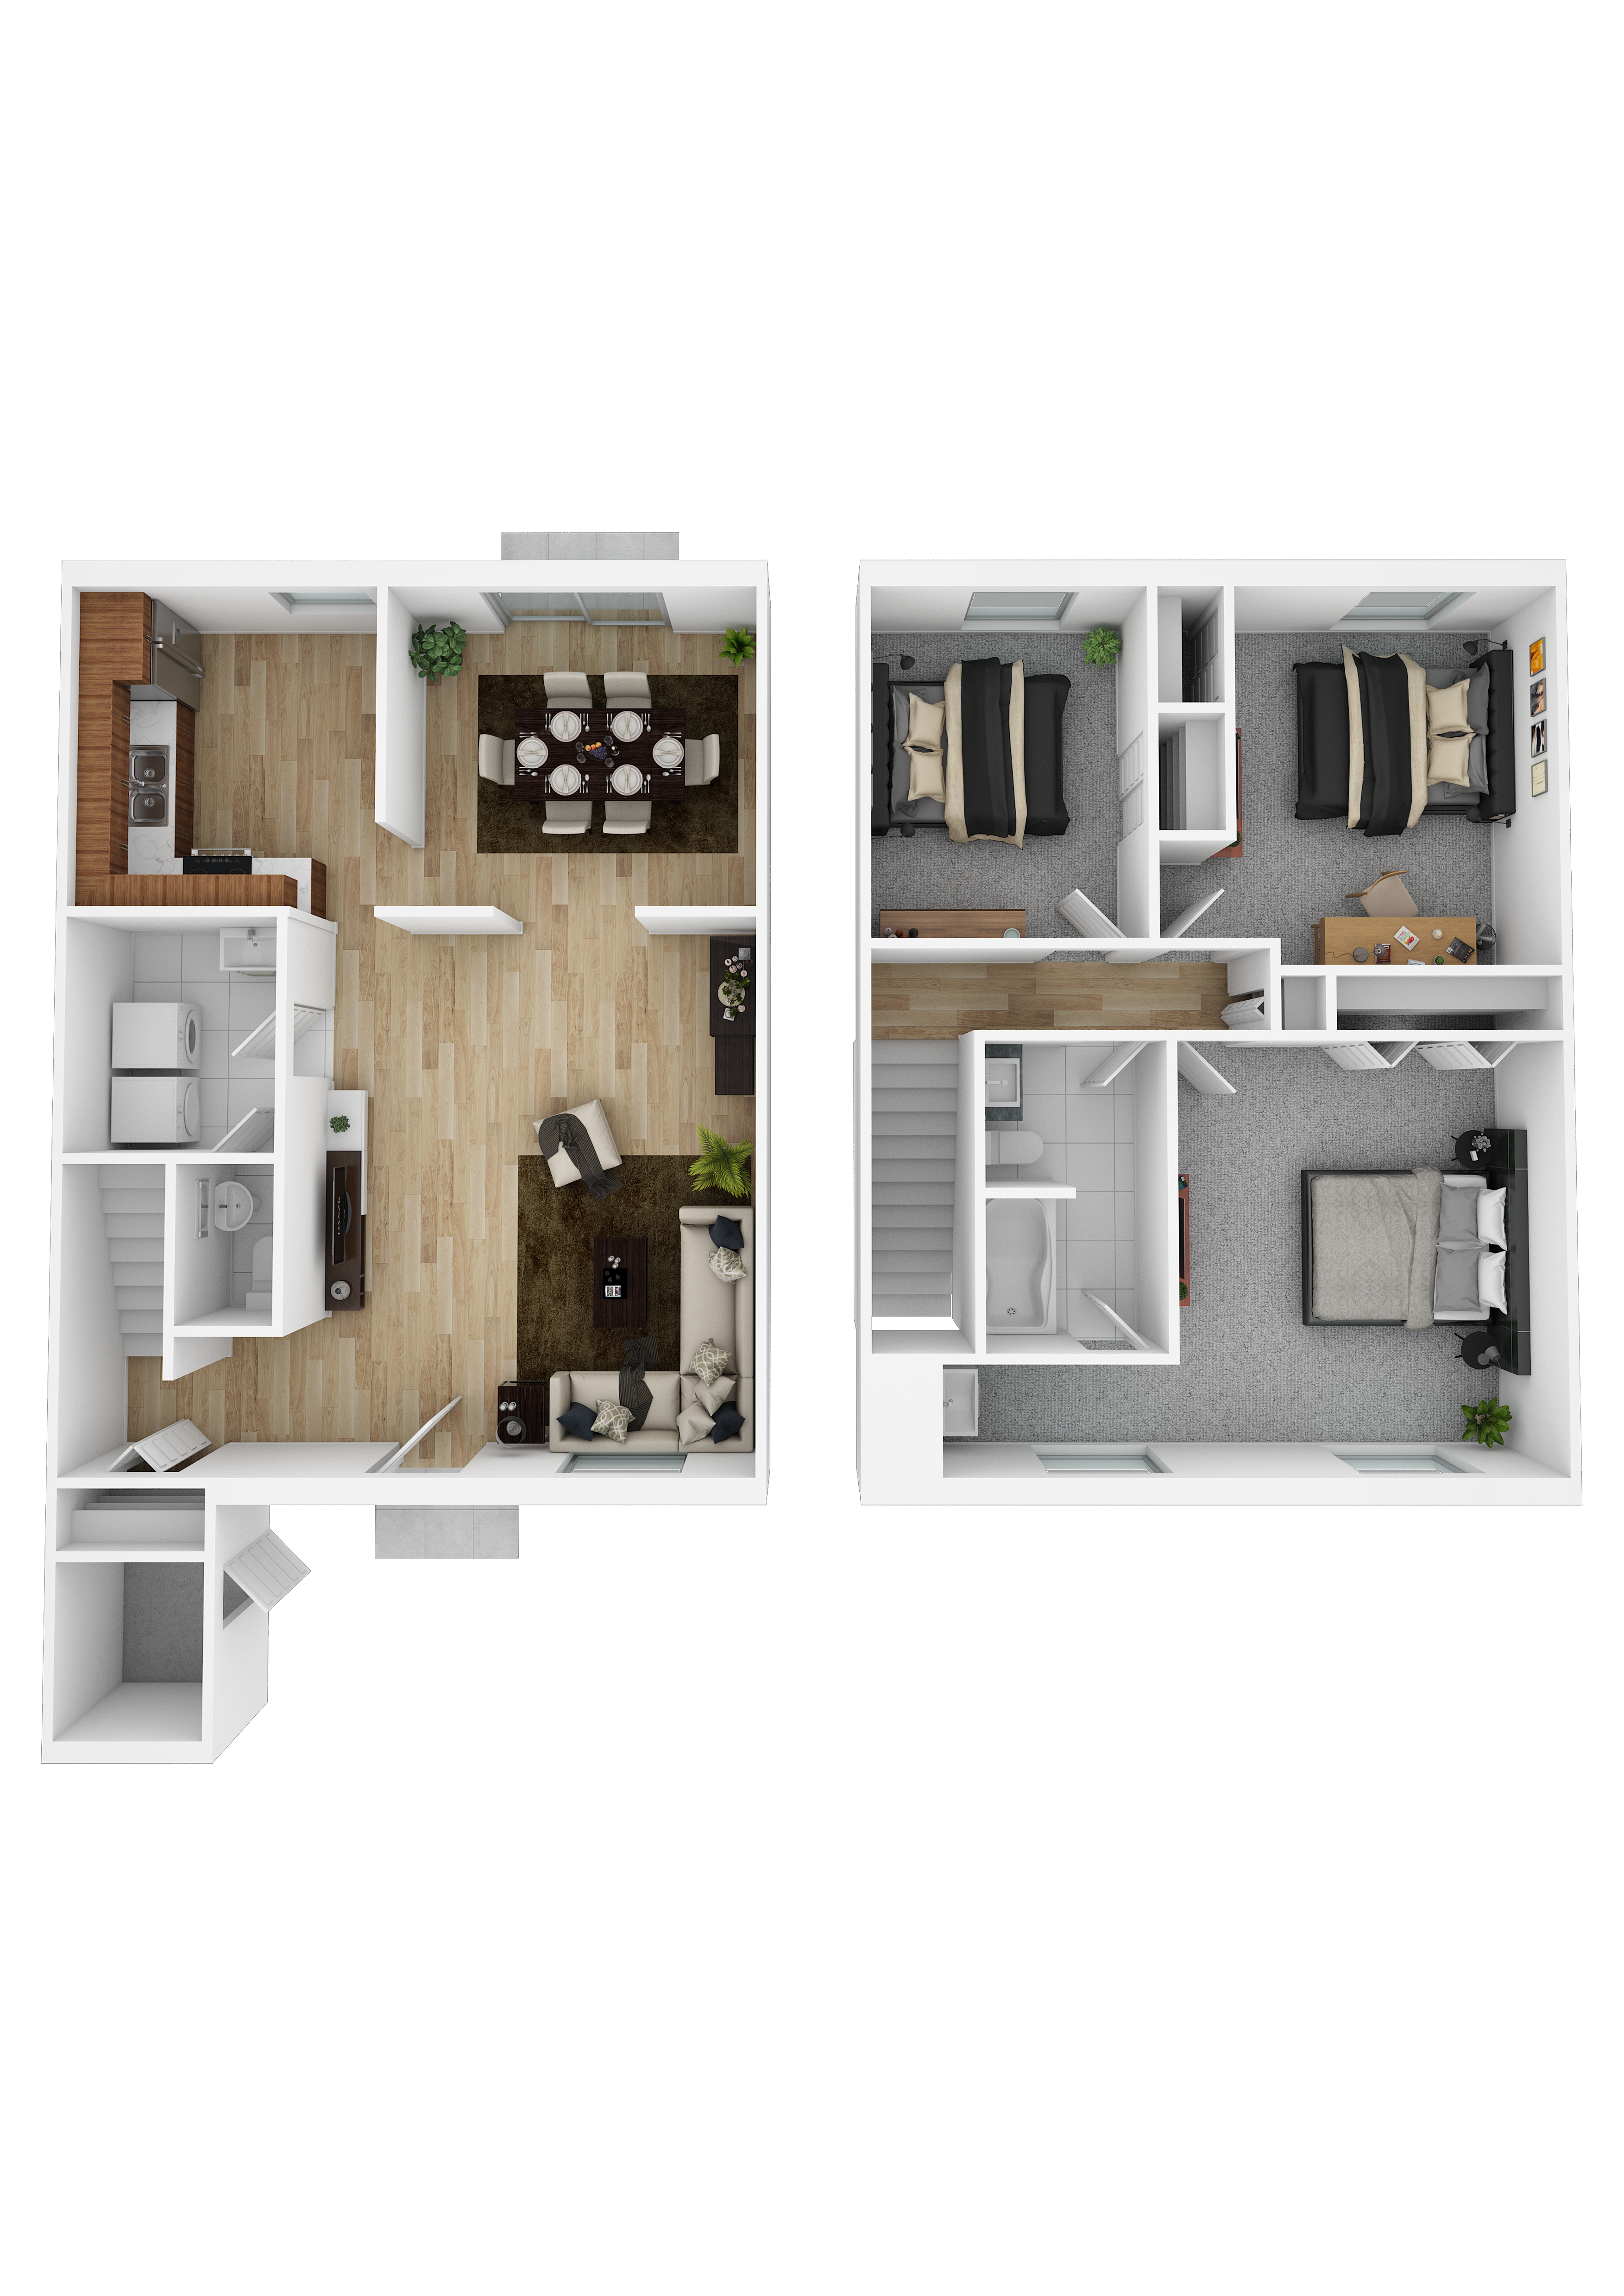 Gateway Airport Townhome Floor plan Style A,Gateway Airport Townhome Floor plan Style A